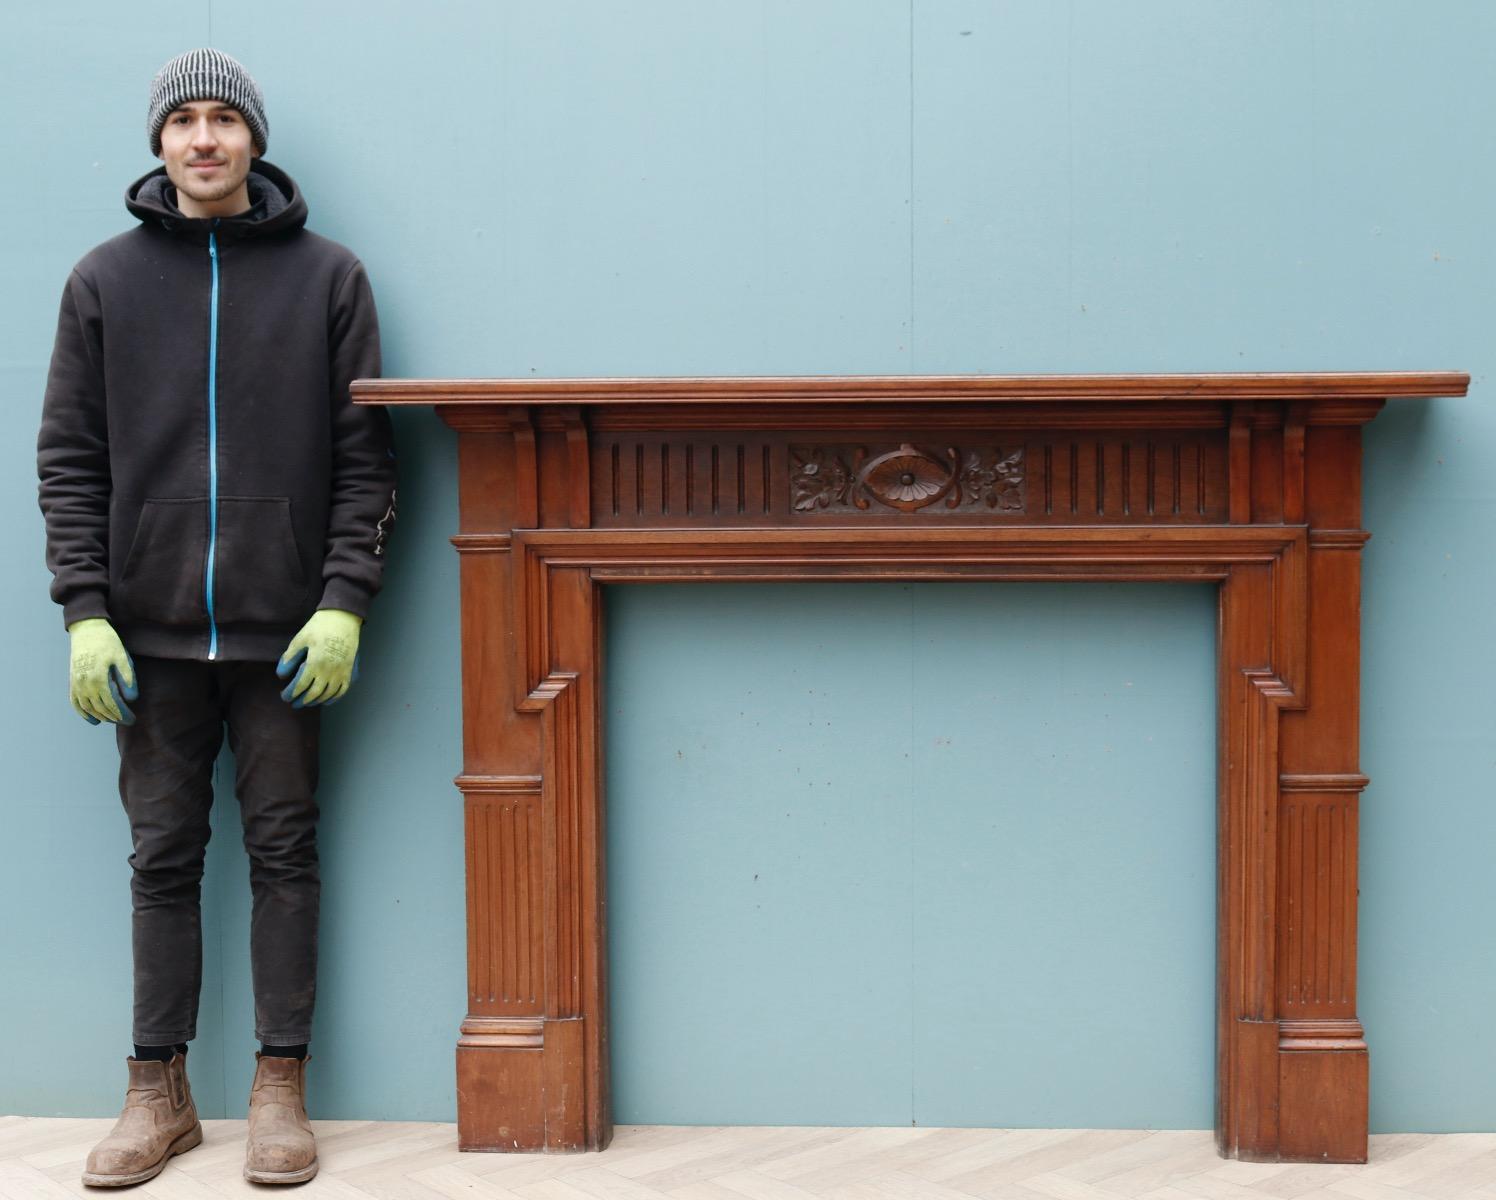 A fire surround in the Arts and Crafts style with carved jambs. The frieze depicts foliage and swags.

Additional dimensions 

Opening height 96.5 cm

Opening width 101.5 cm

Width between outsides of the foot blocks 148 cm.